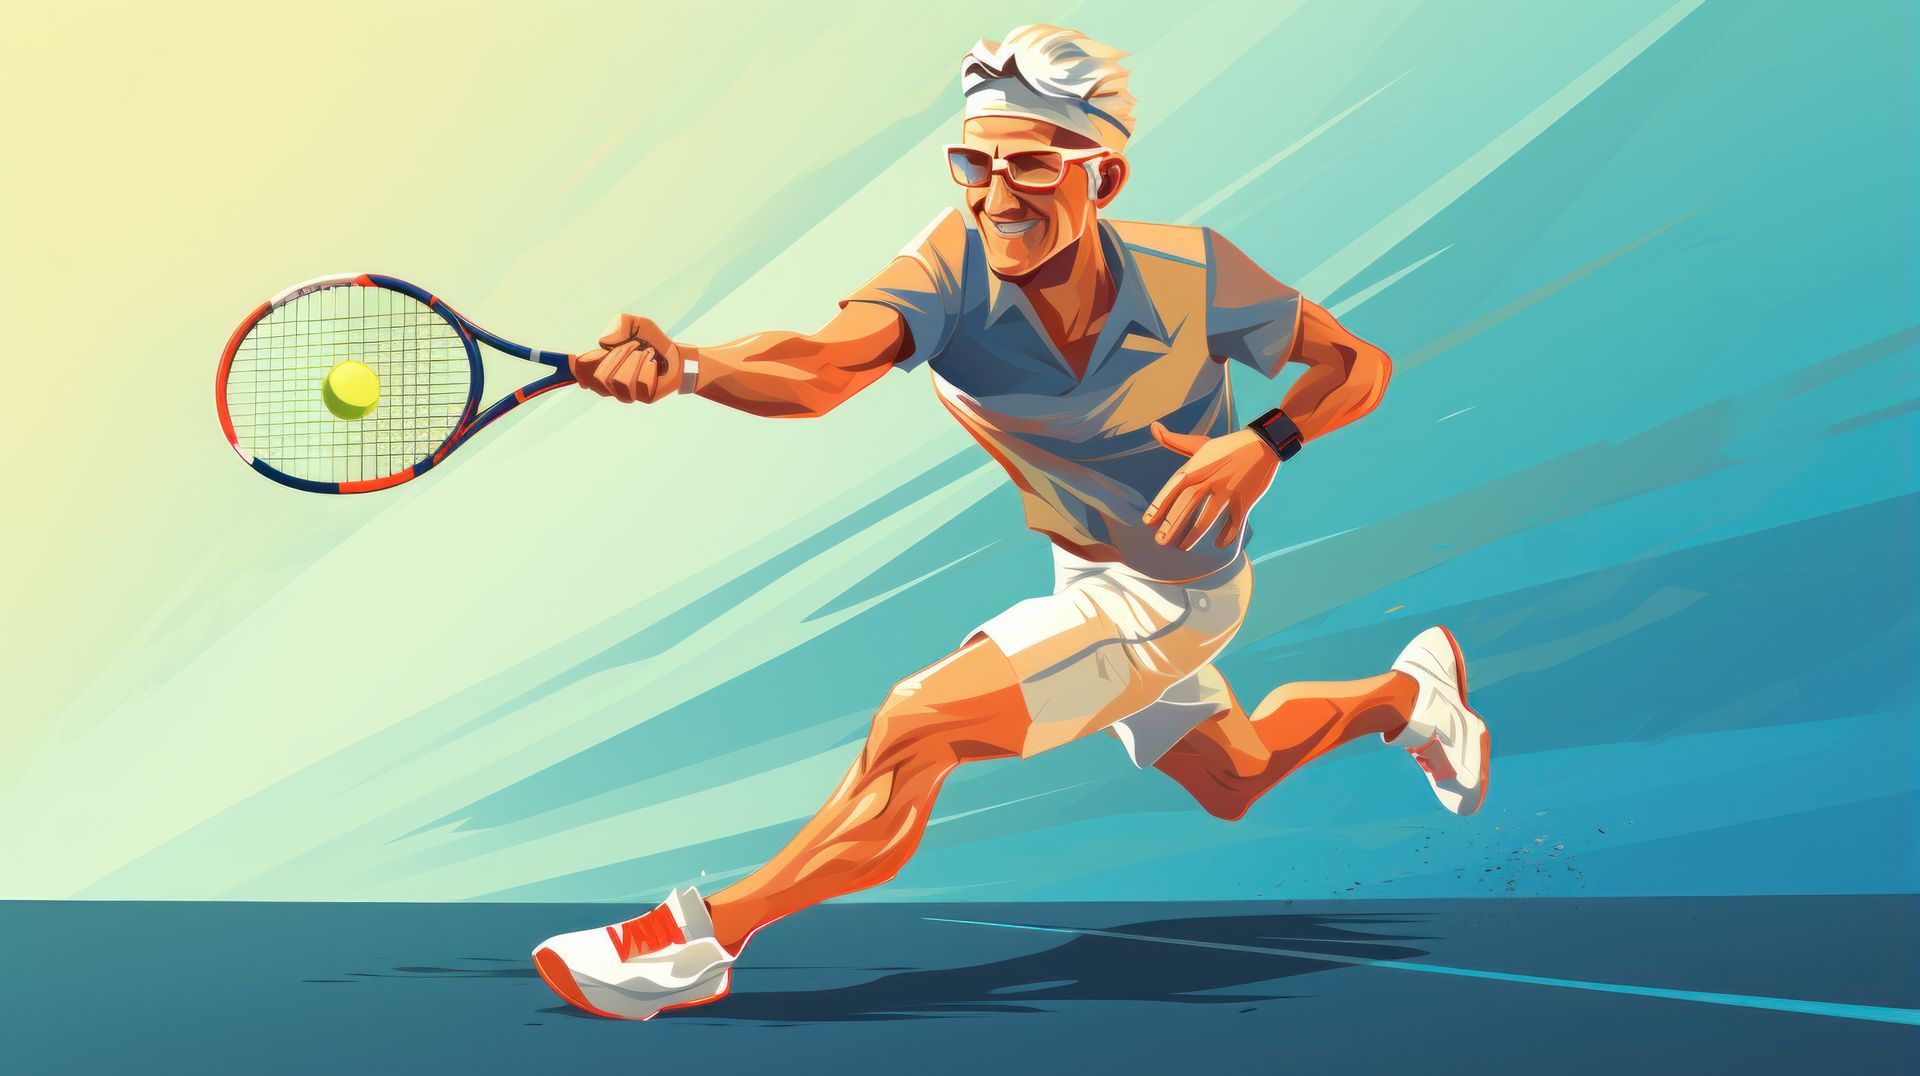 Cartoon-like image of gray-haired man running and stretching out his tennis racket to return a ball